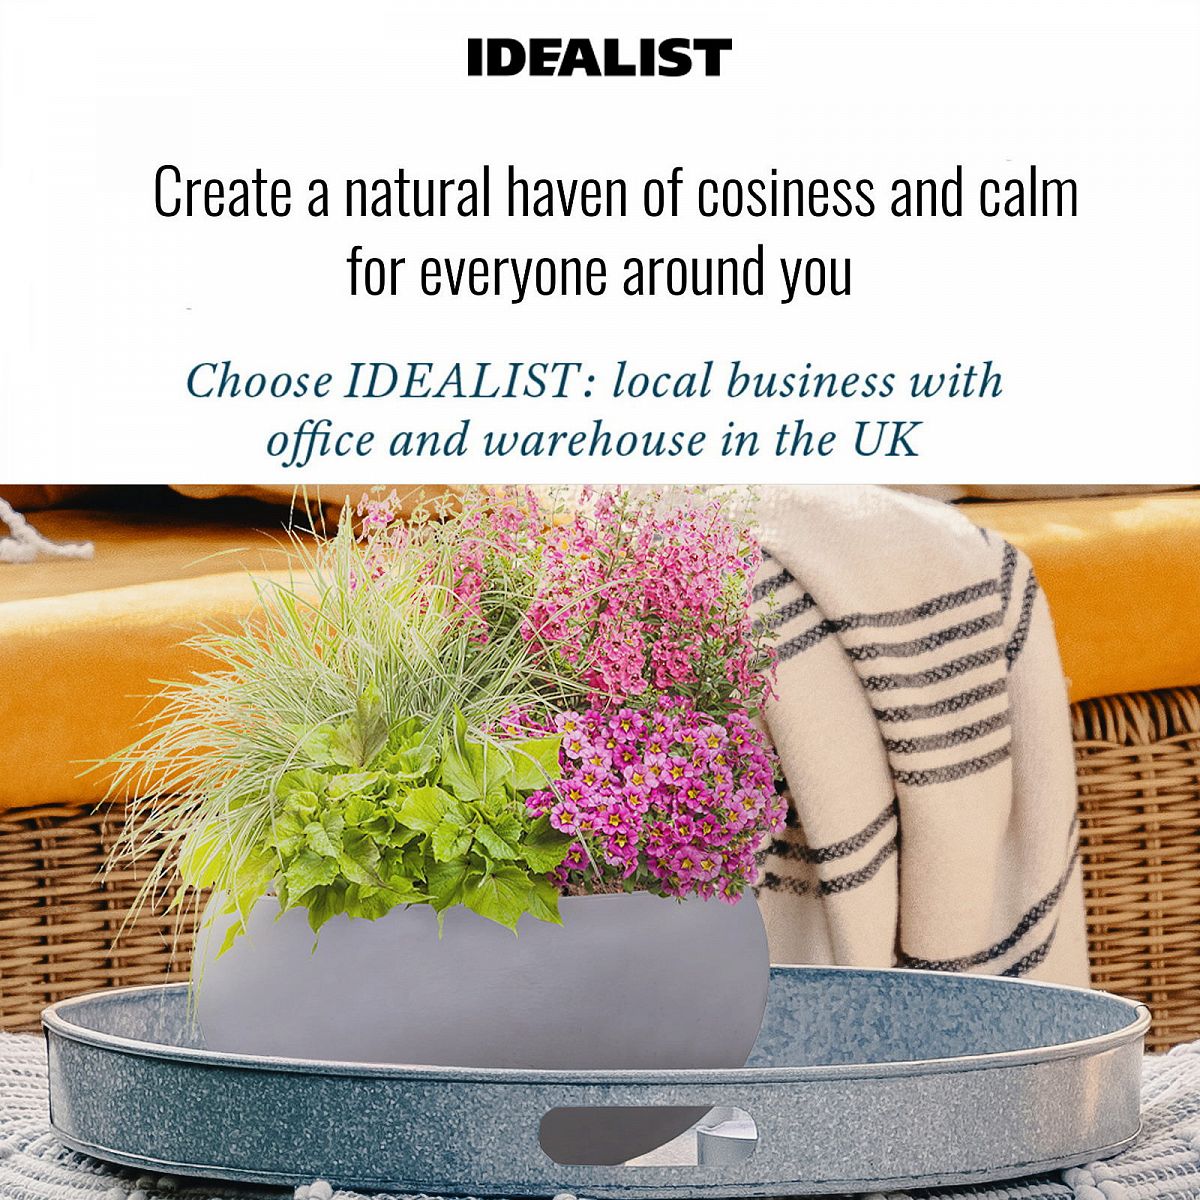 IDEALIST Lite Classic Smooth Bowl Outdoor Planter